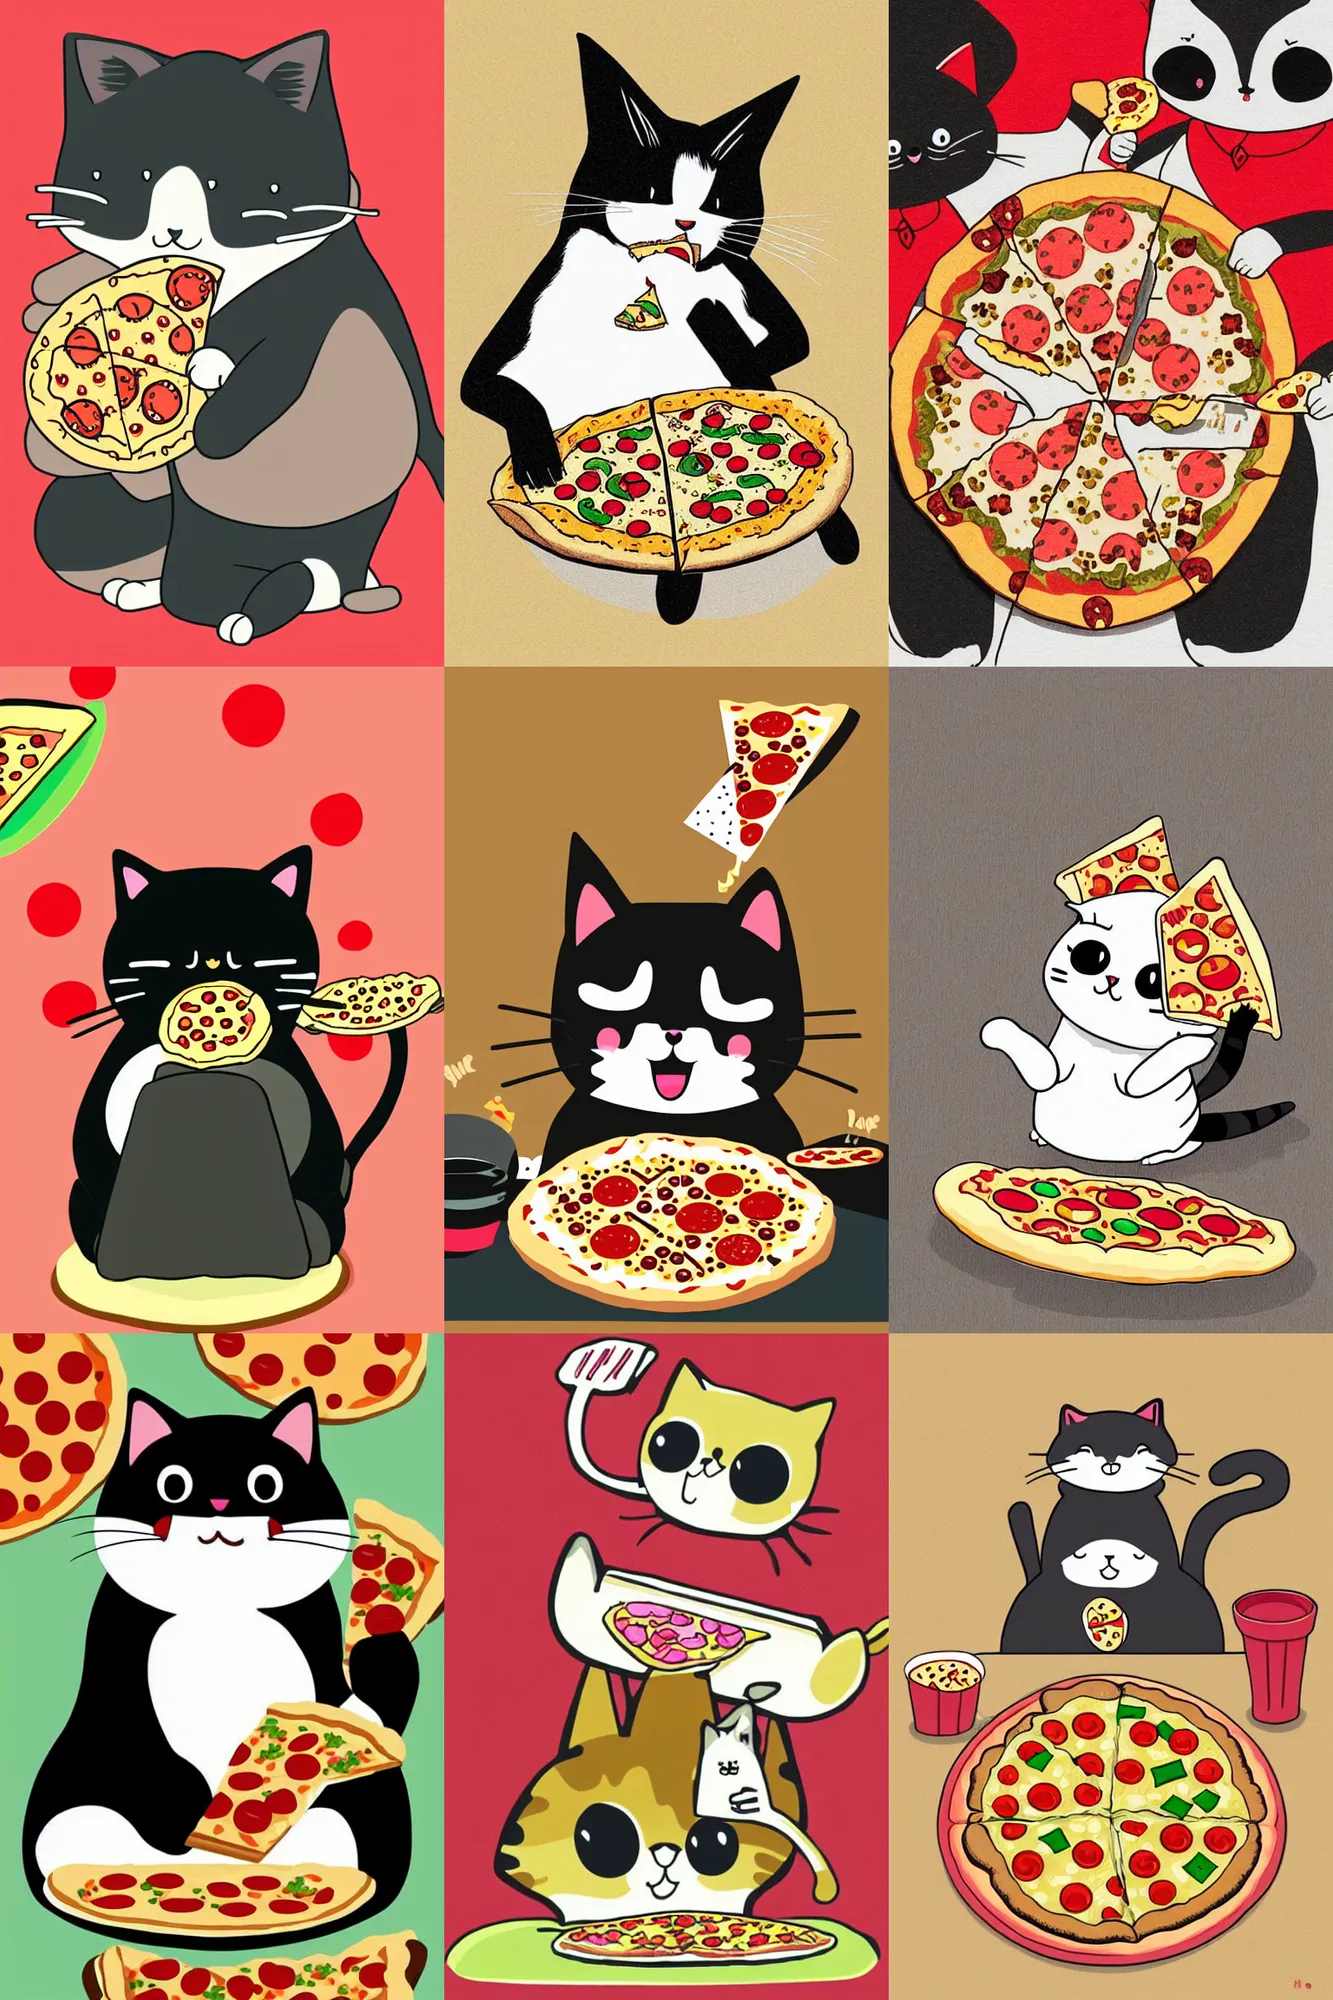 Prompt: Kawaii illustration of a cat eating pizza, japanese cute